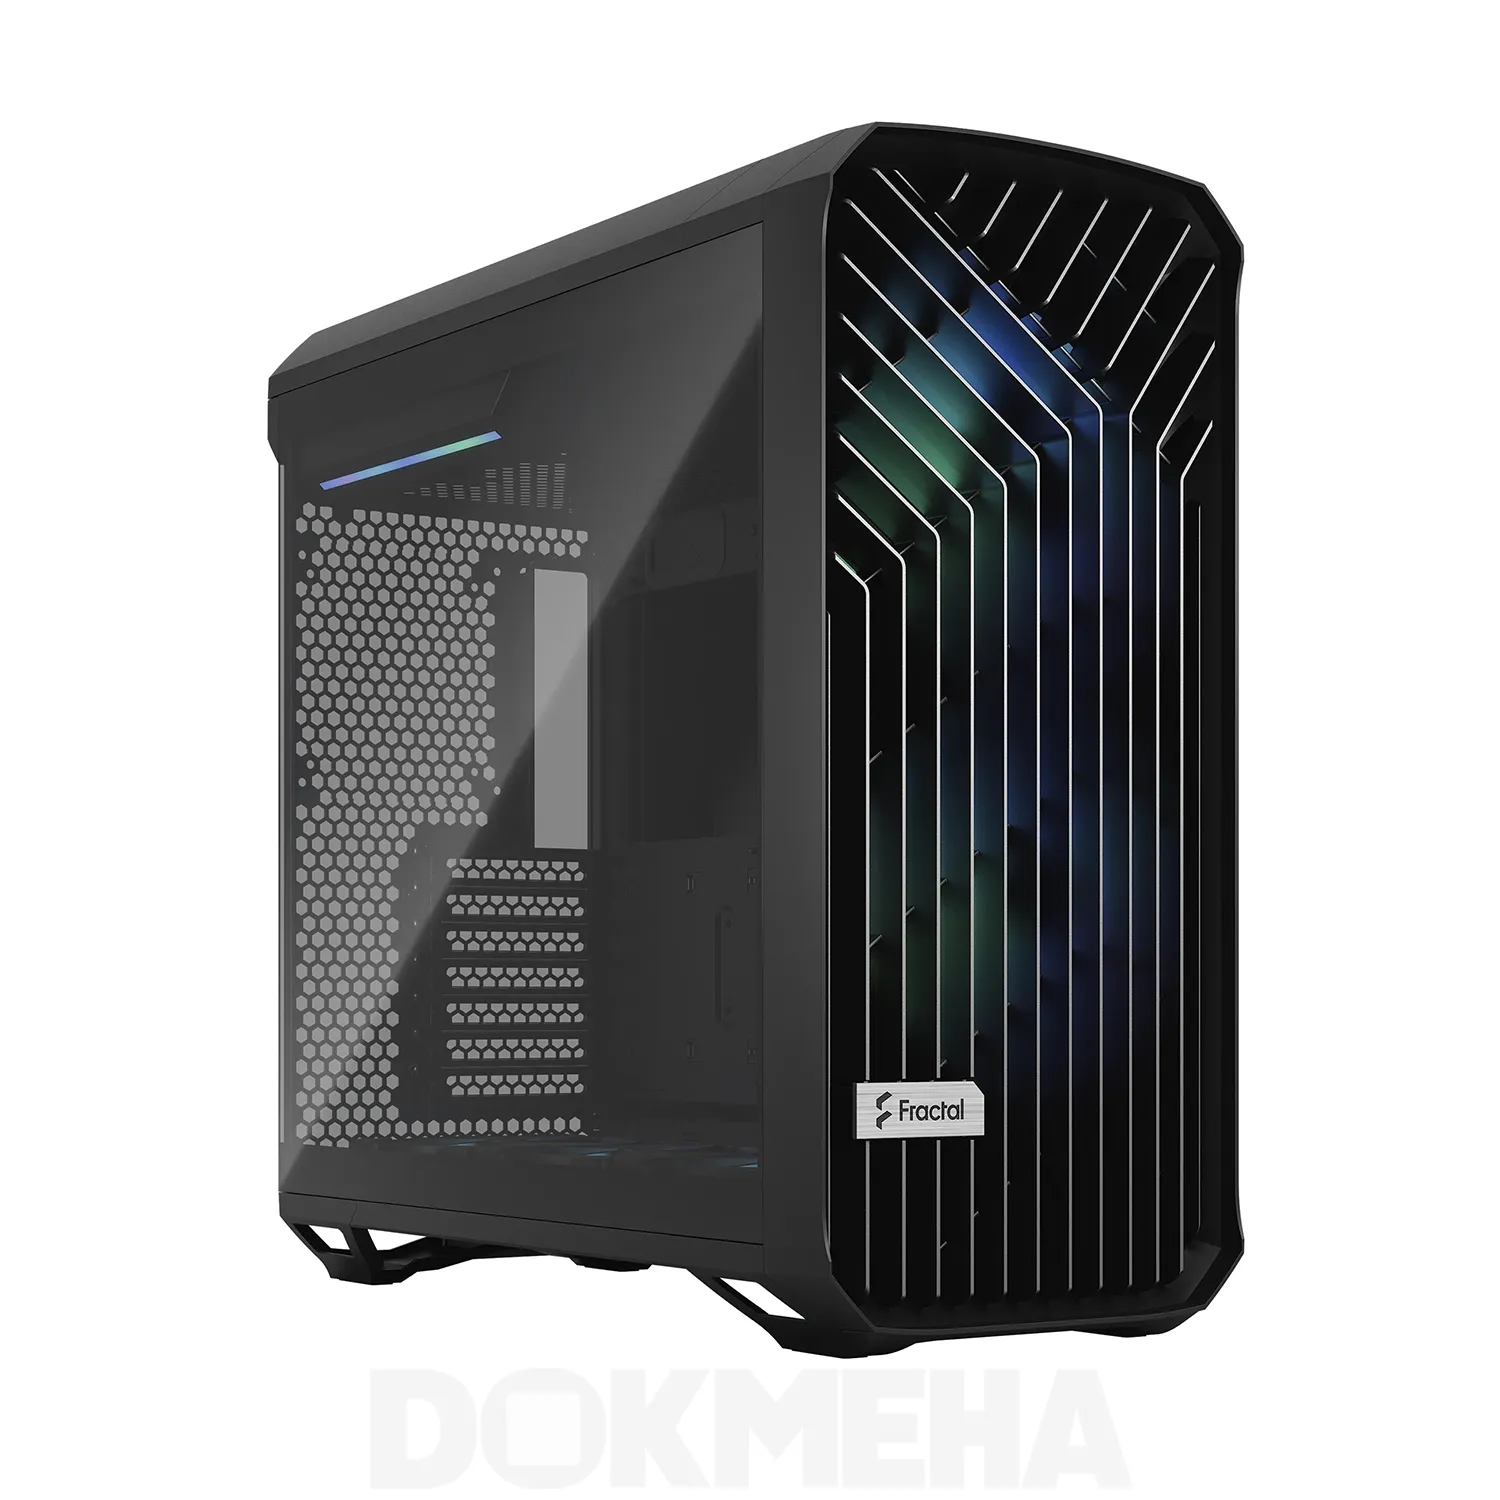 DOKMEHA W10000 Intel Xeon Scalable (3TH GEN) F-Class FULL Tower Workstation -1500 20